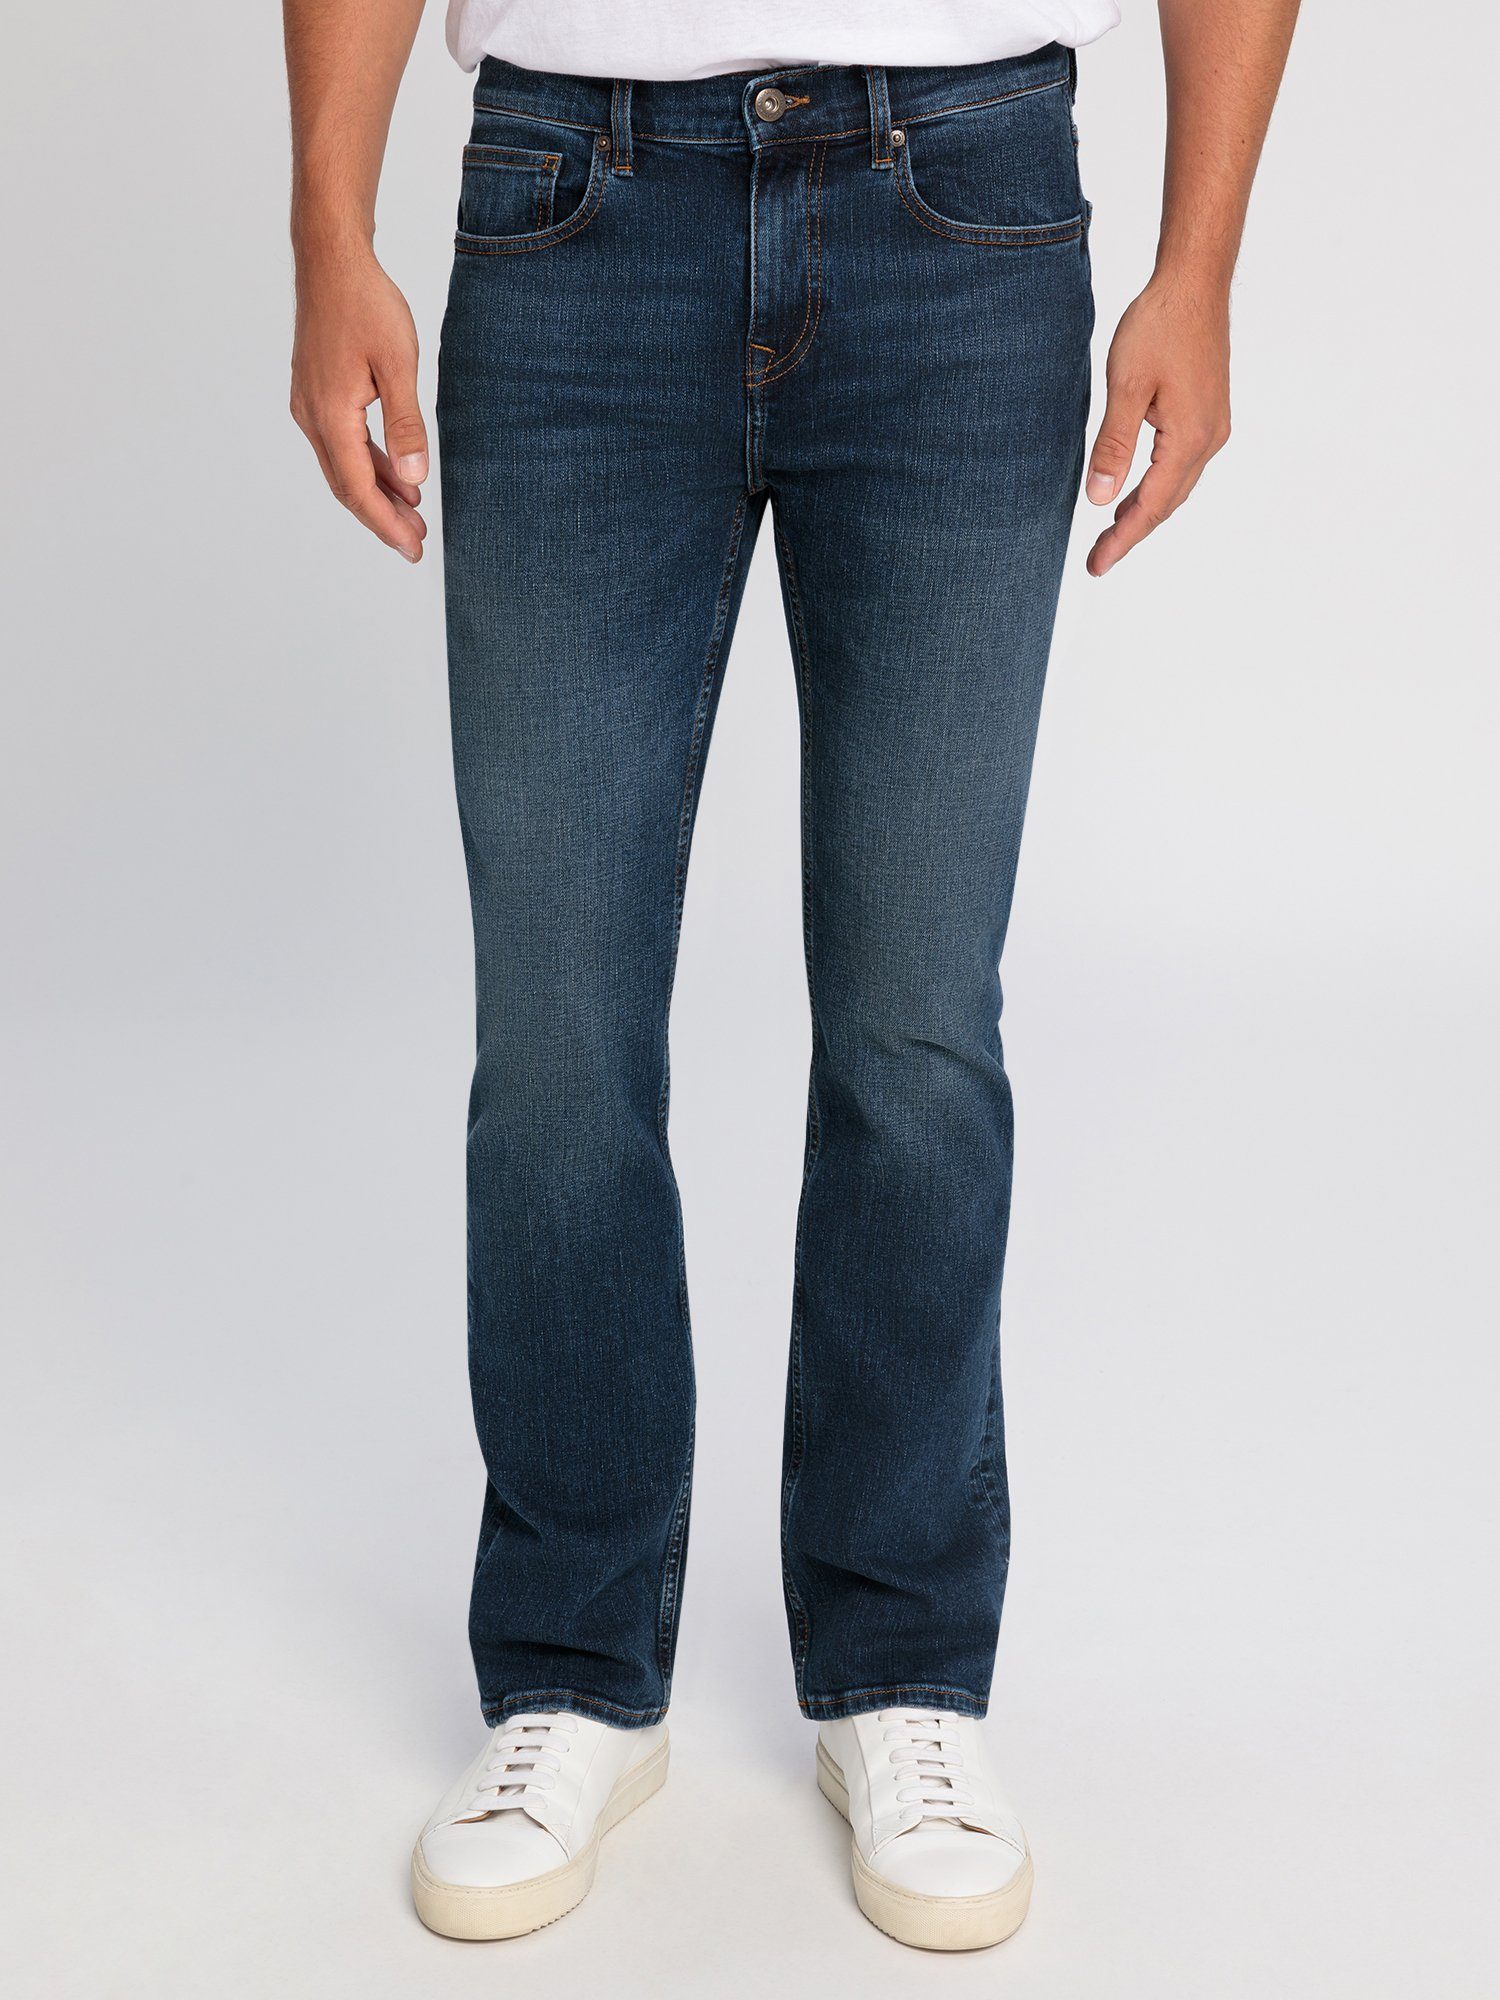 Colin CROSS JEANS® Bootcut-Jeans